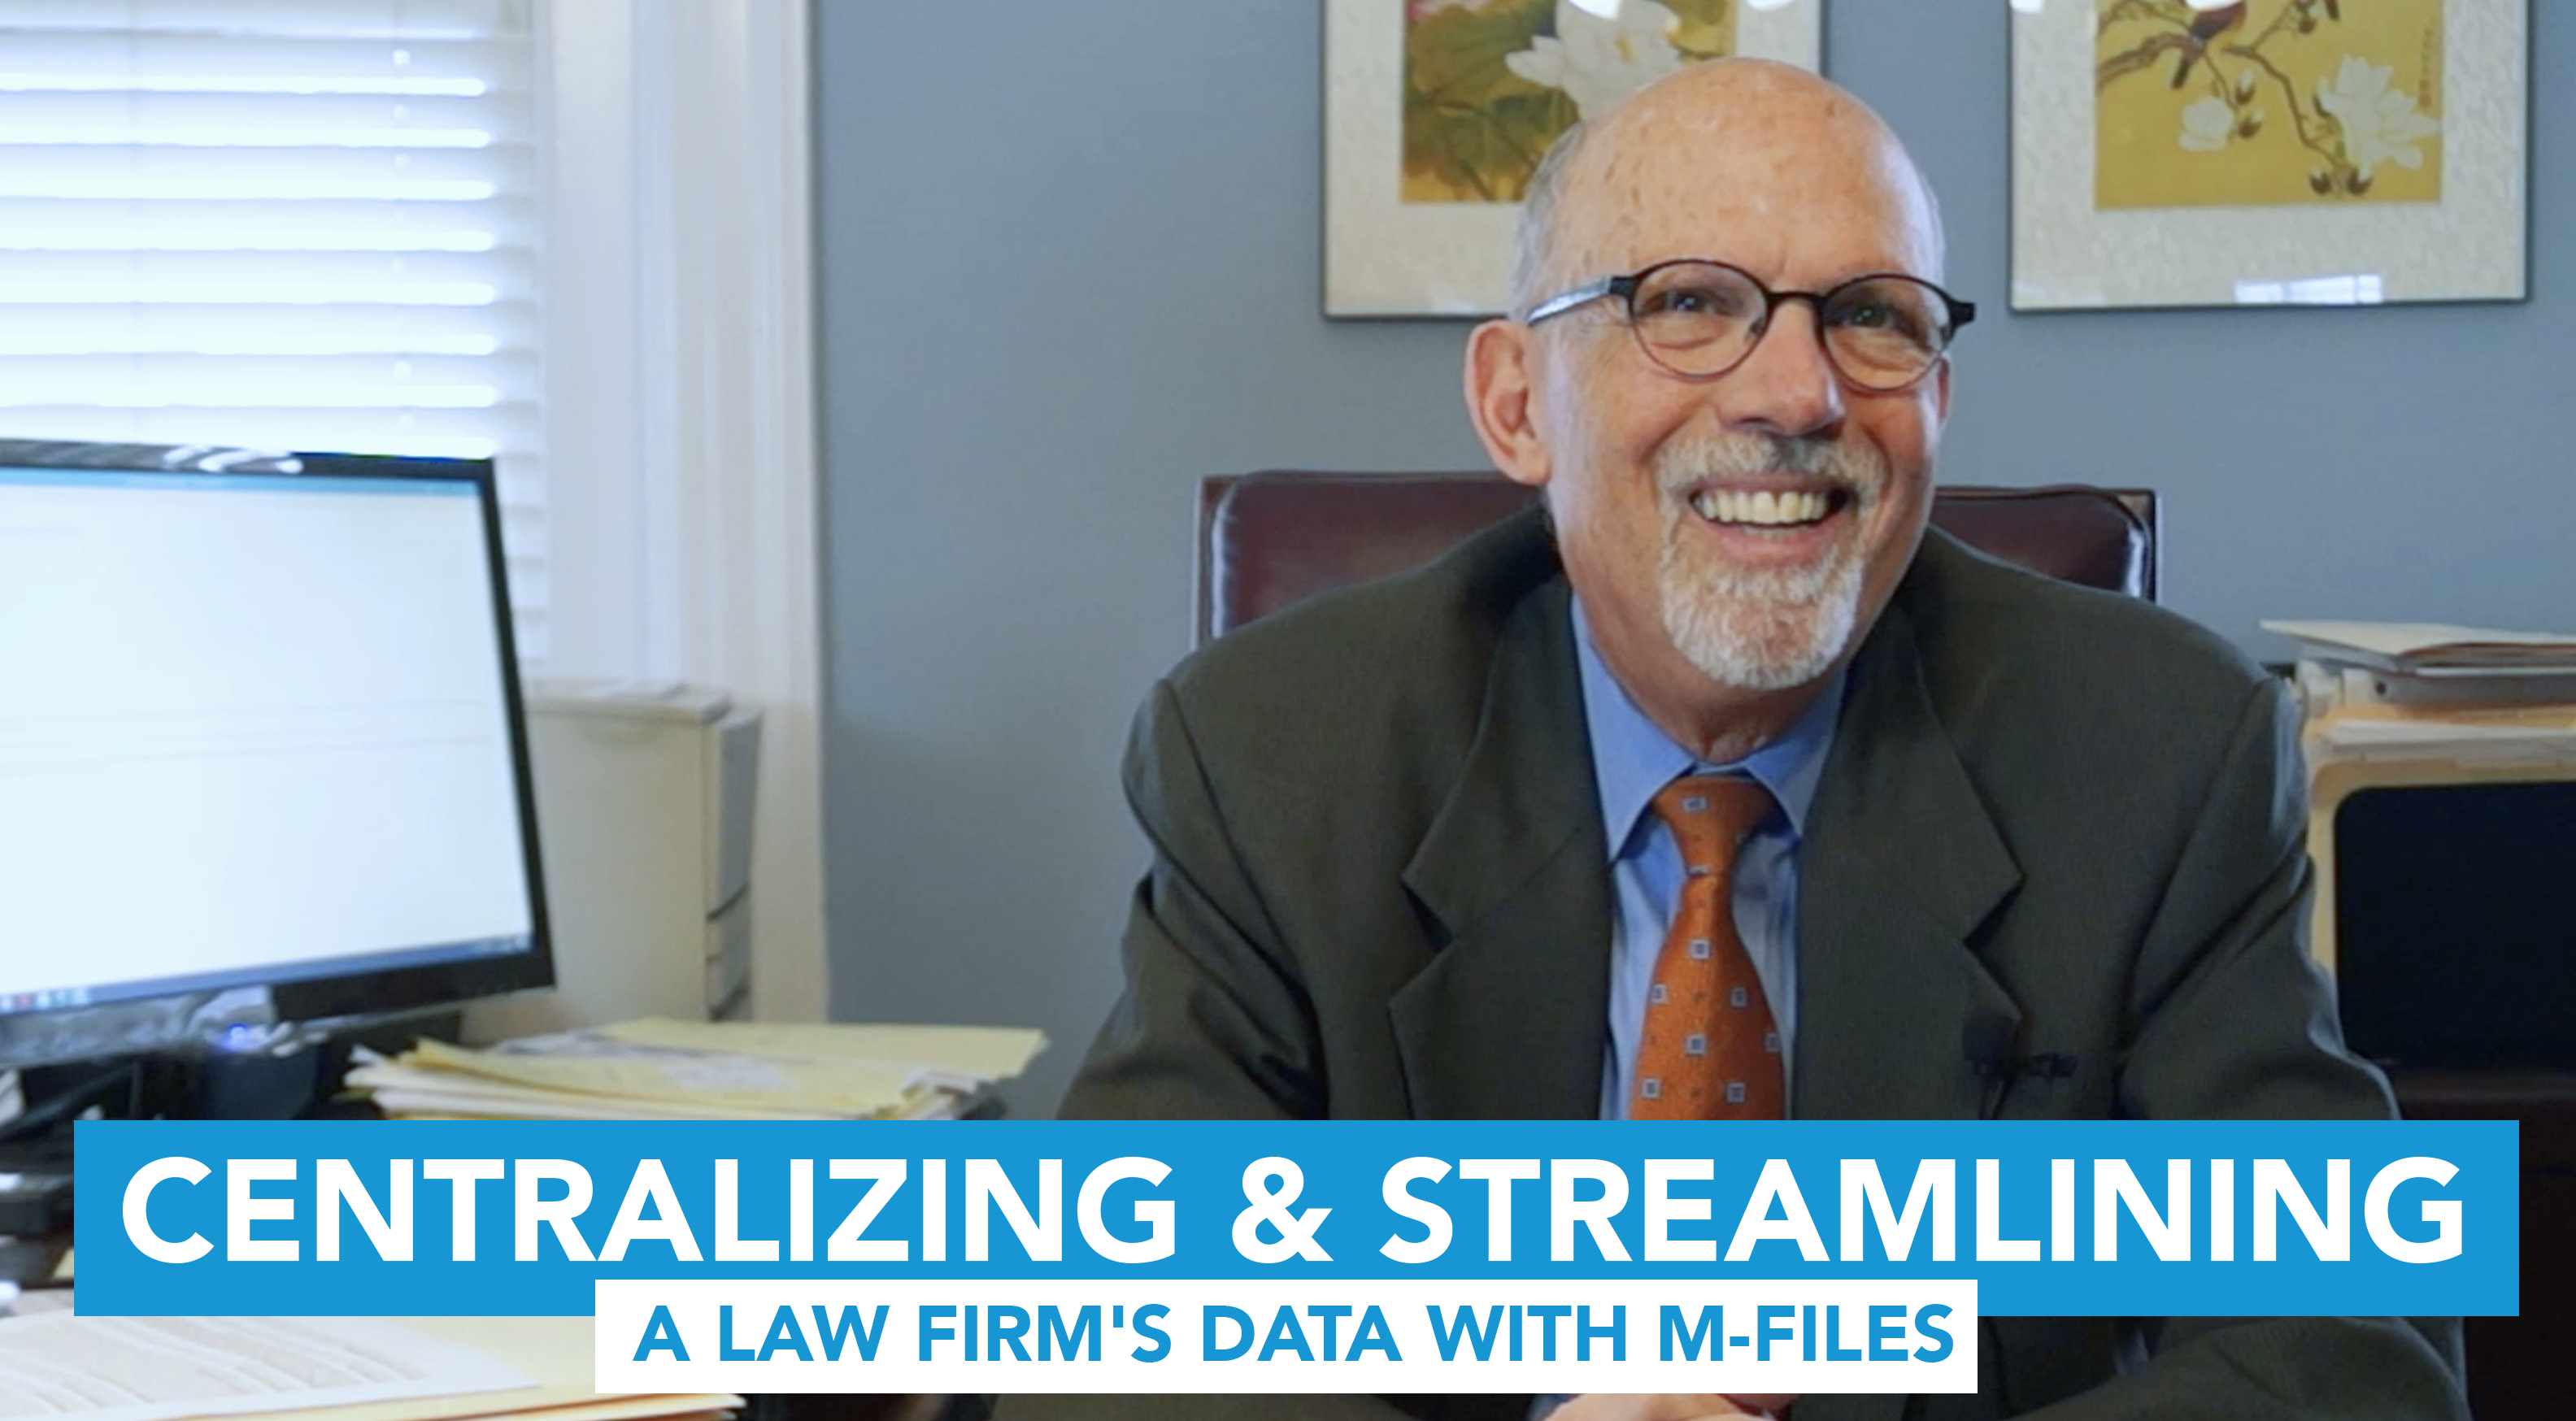 Centralizing and Streamlining a Law Firm's Data with M-Files